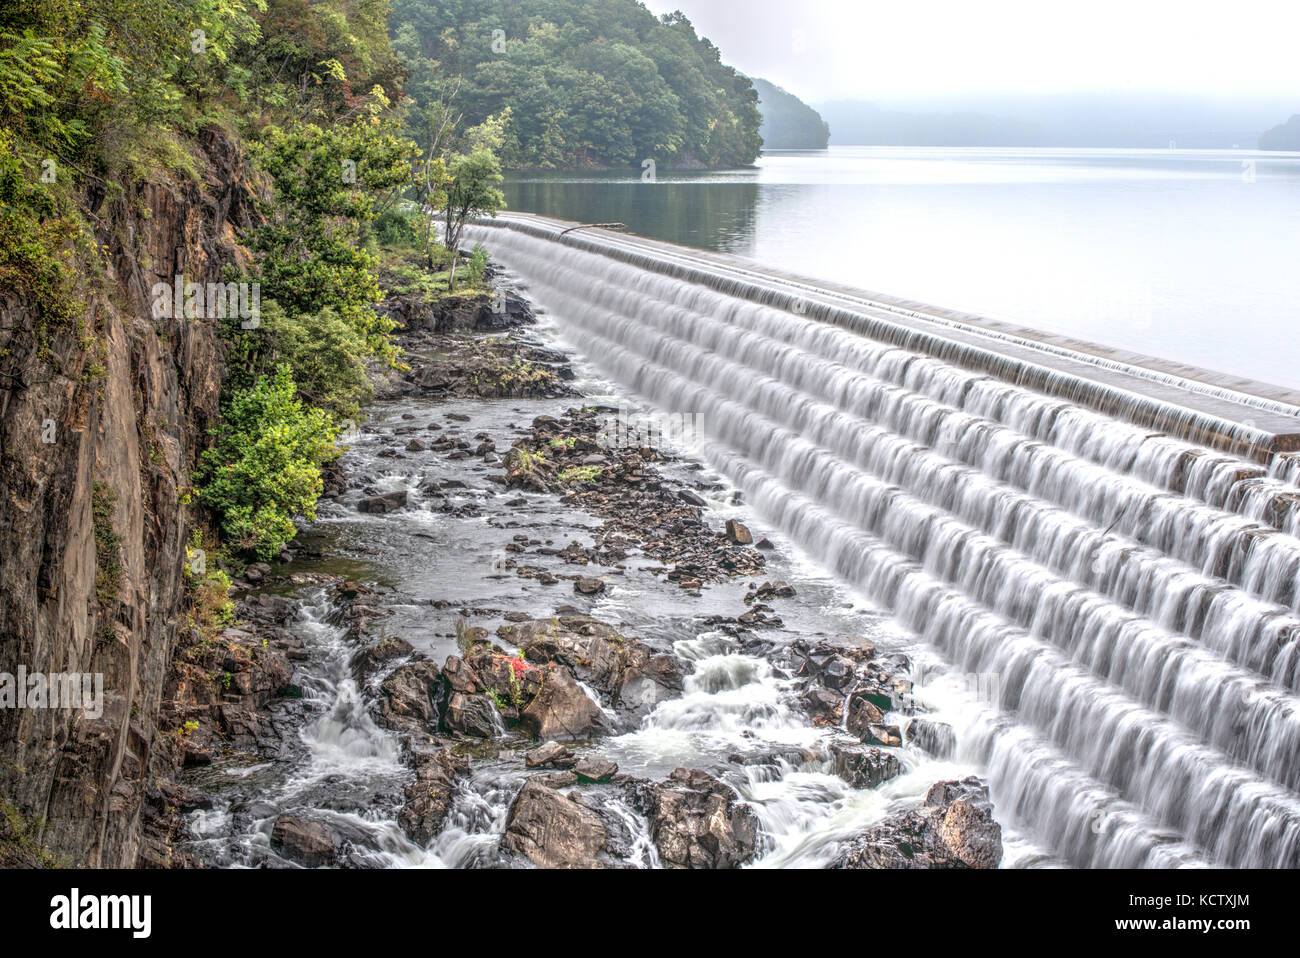 Man made spillway on a lake next to a natural cliff creates a beautiful waterfall from stepped rocks and bricks Stock Photo